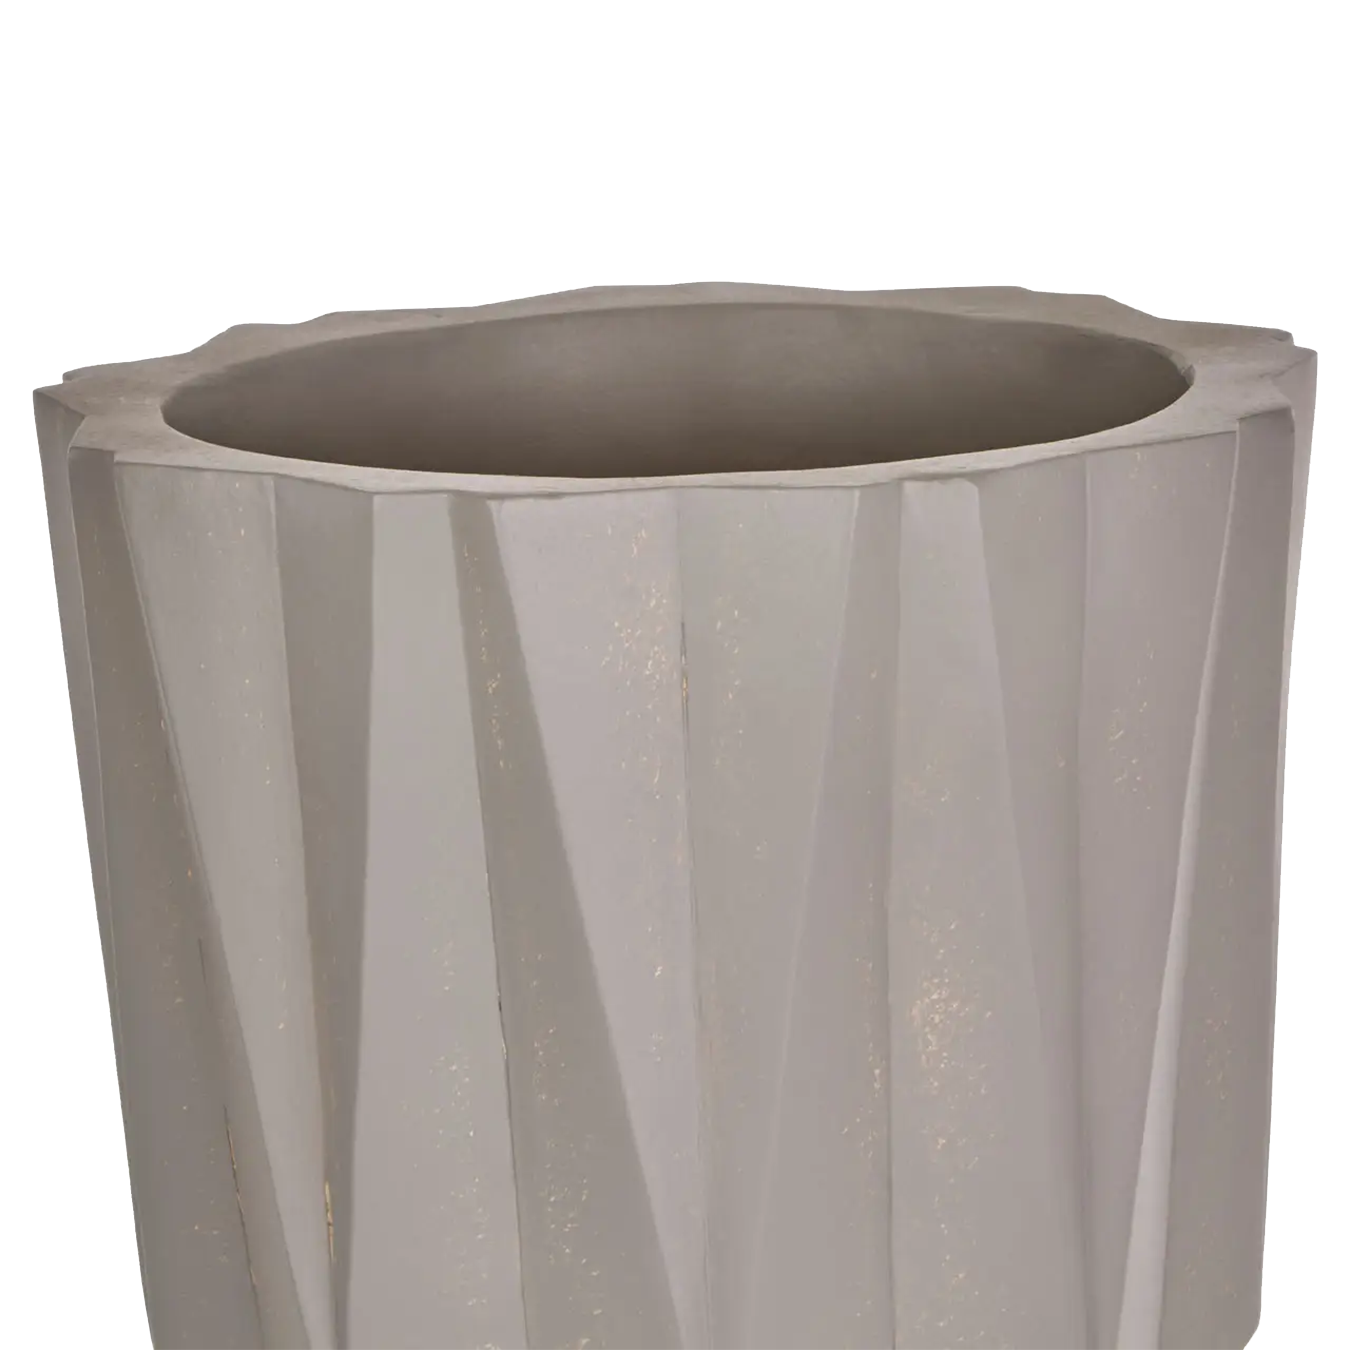 Darnell Large Grey Multi Faceted Planter